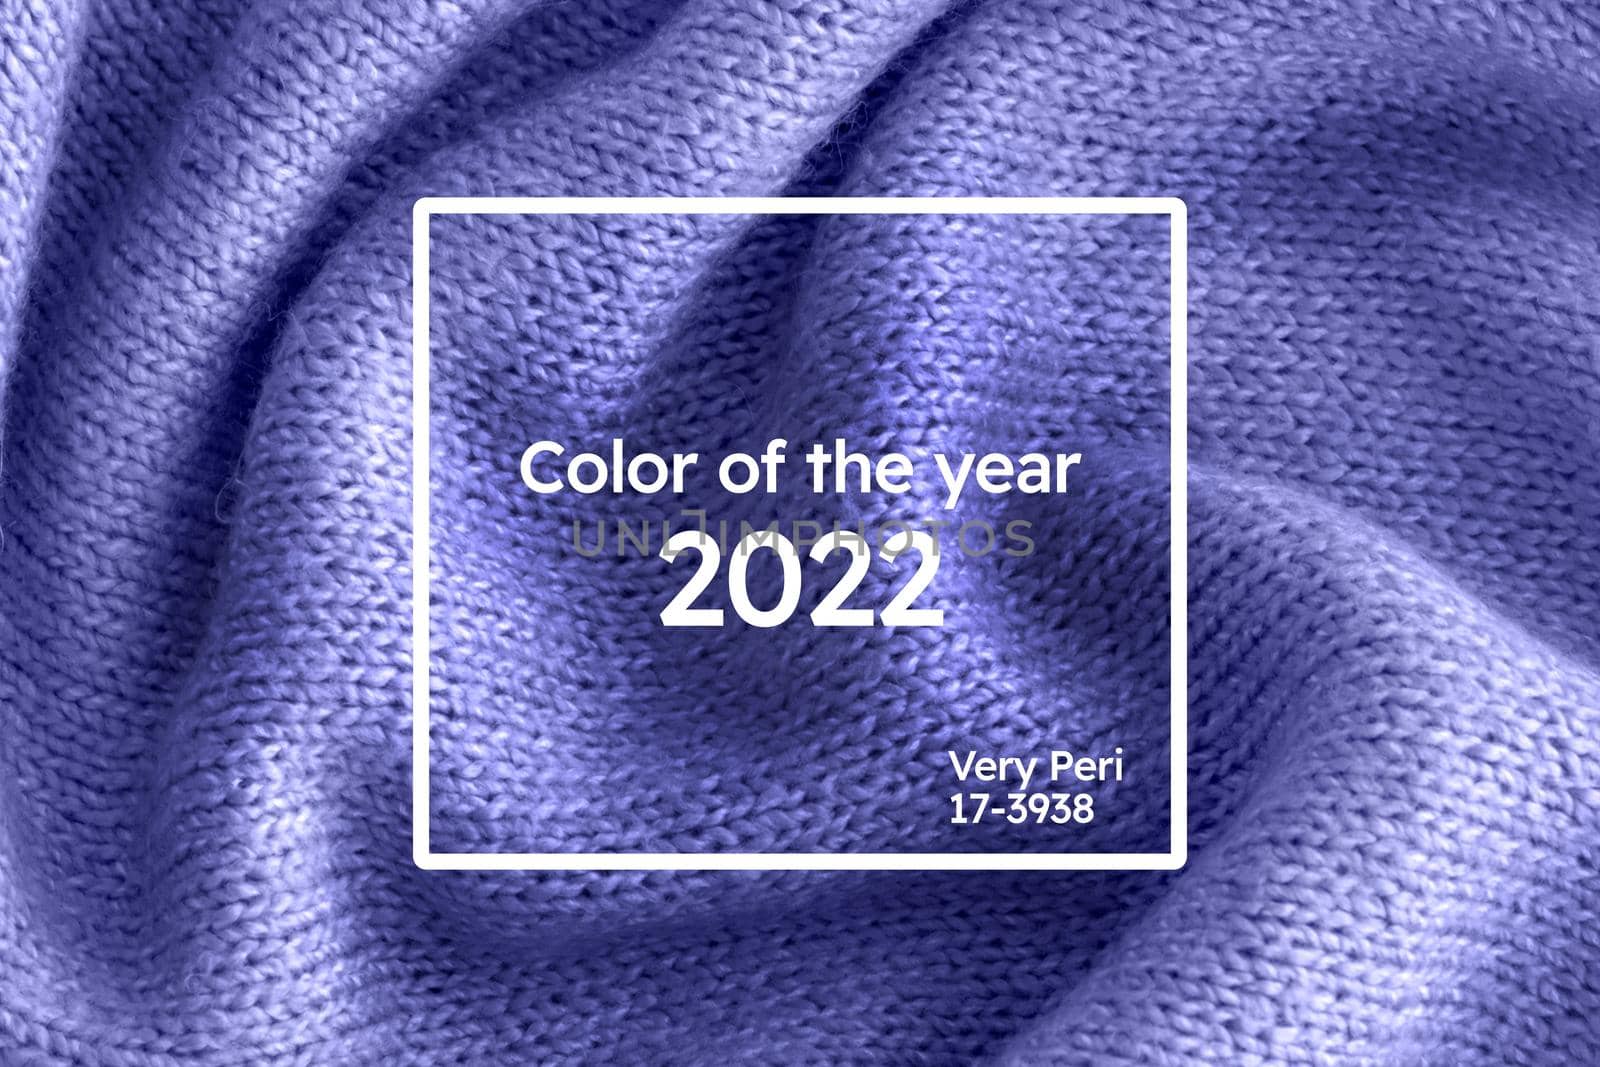 Color of the year 2022 soft knitted sweater texture closeup. Light violet blue abstract background. Trendy soft blue backdrop for web design. Luxury twisted fabric backplate